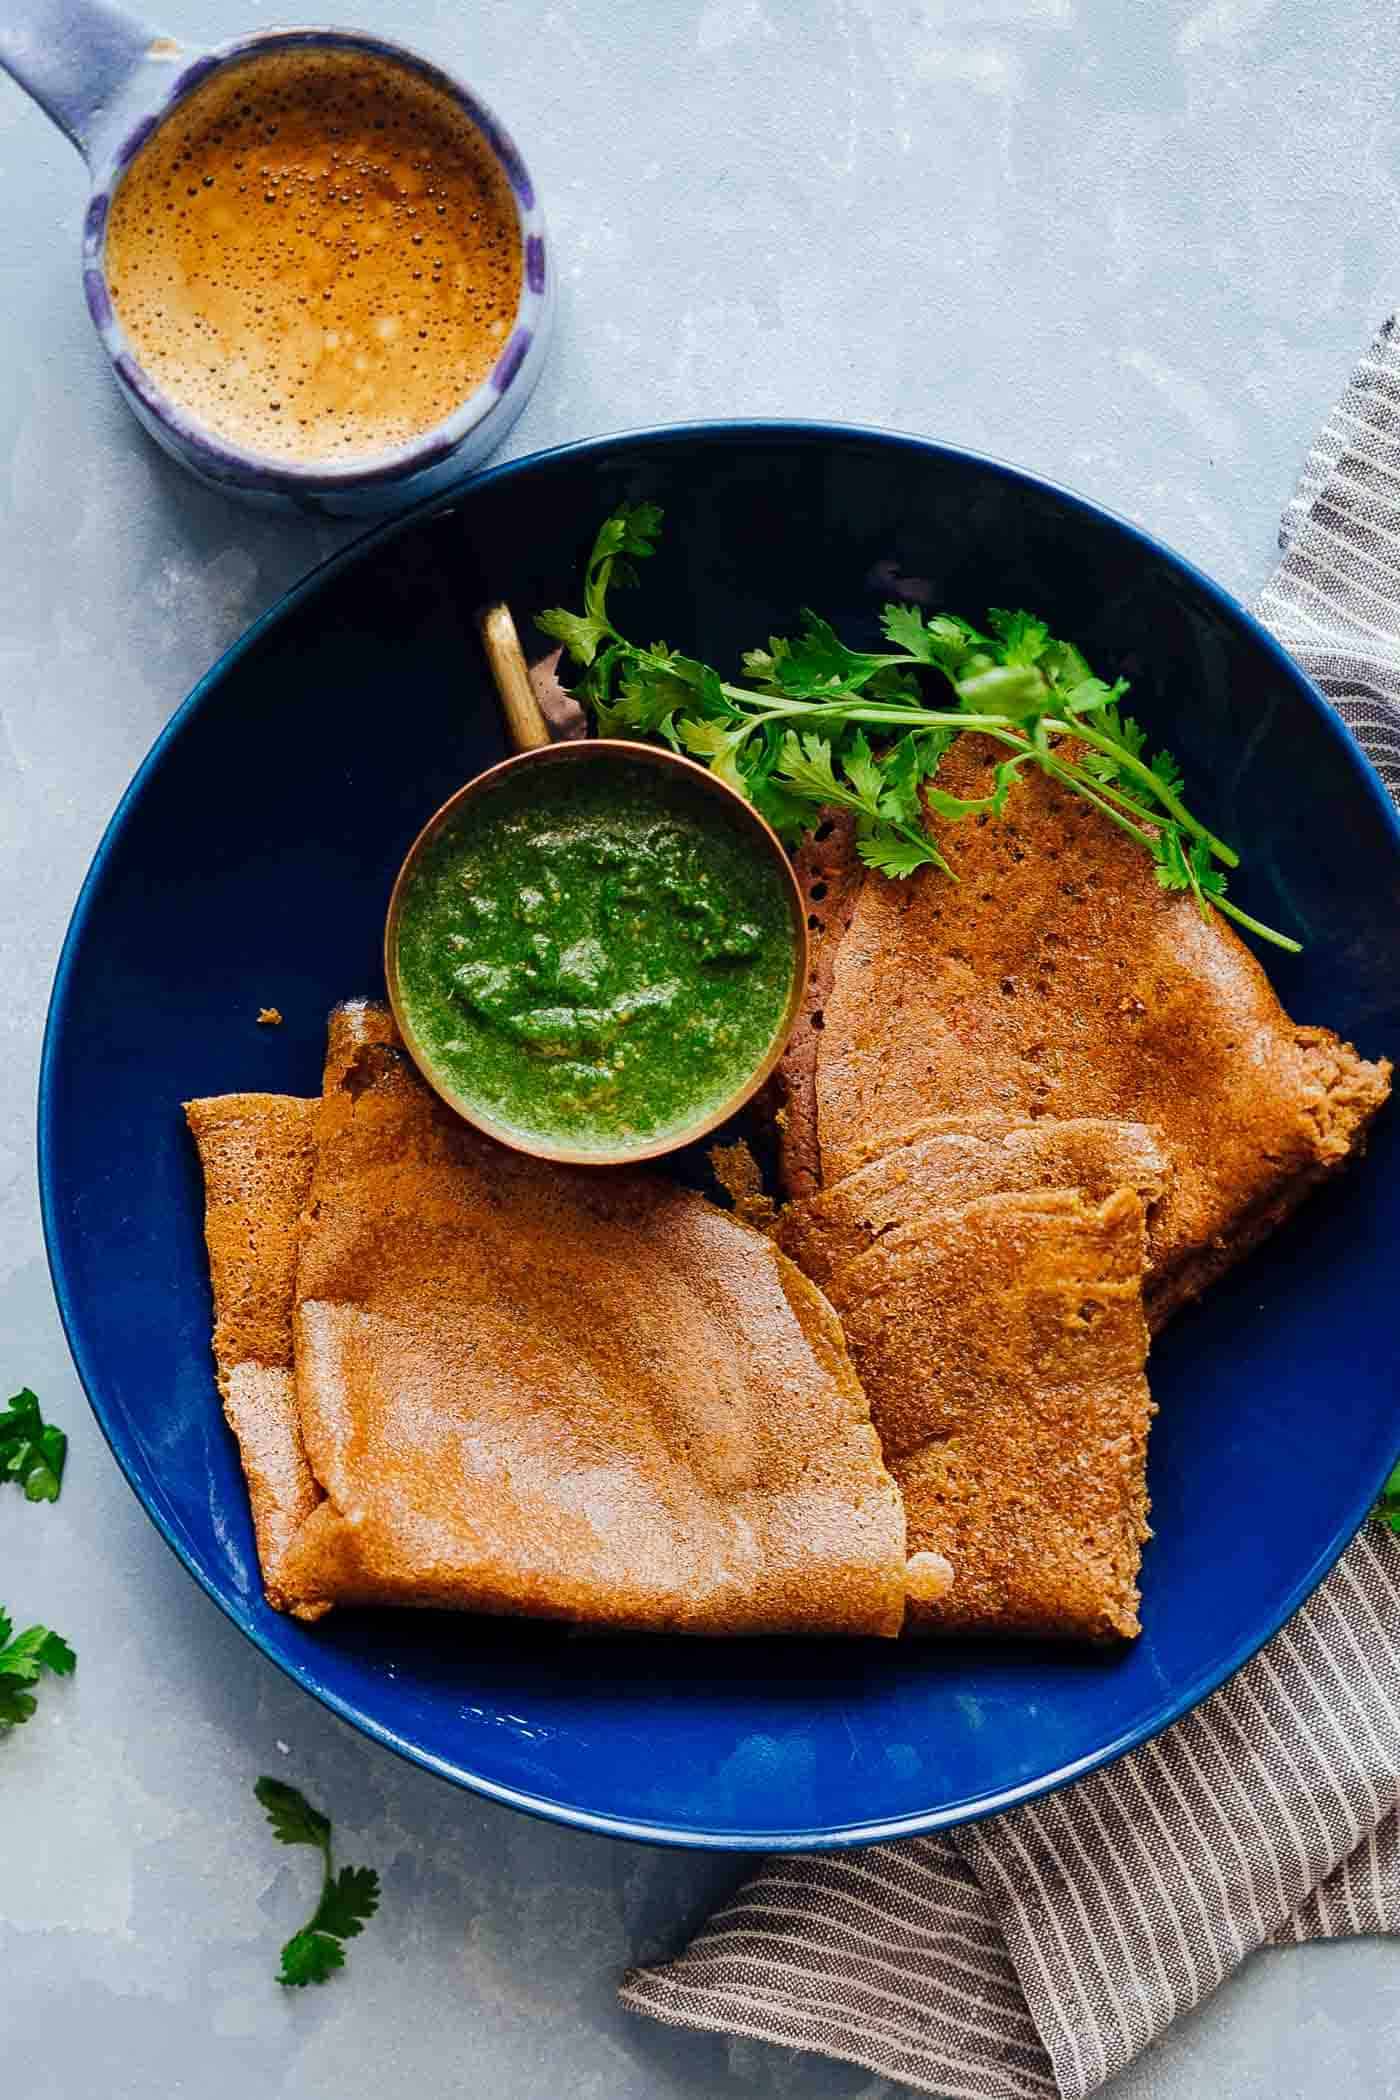 Oats are the easiest thing to make dosas with. The simple batter is made with instant oats and rice flour which is flavored with chilies and ginger. The next time you crave dosas at home and want something healthier, these oats dosas or pancakes will make your day.